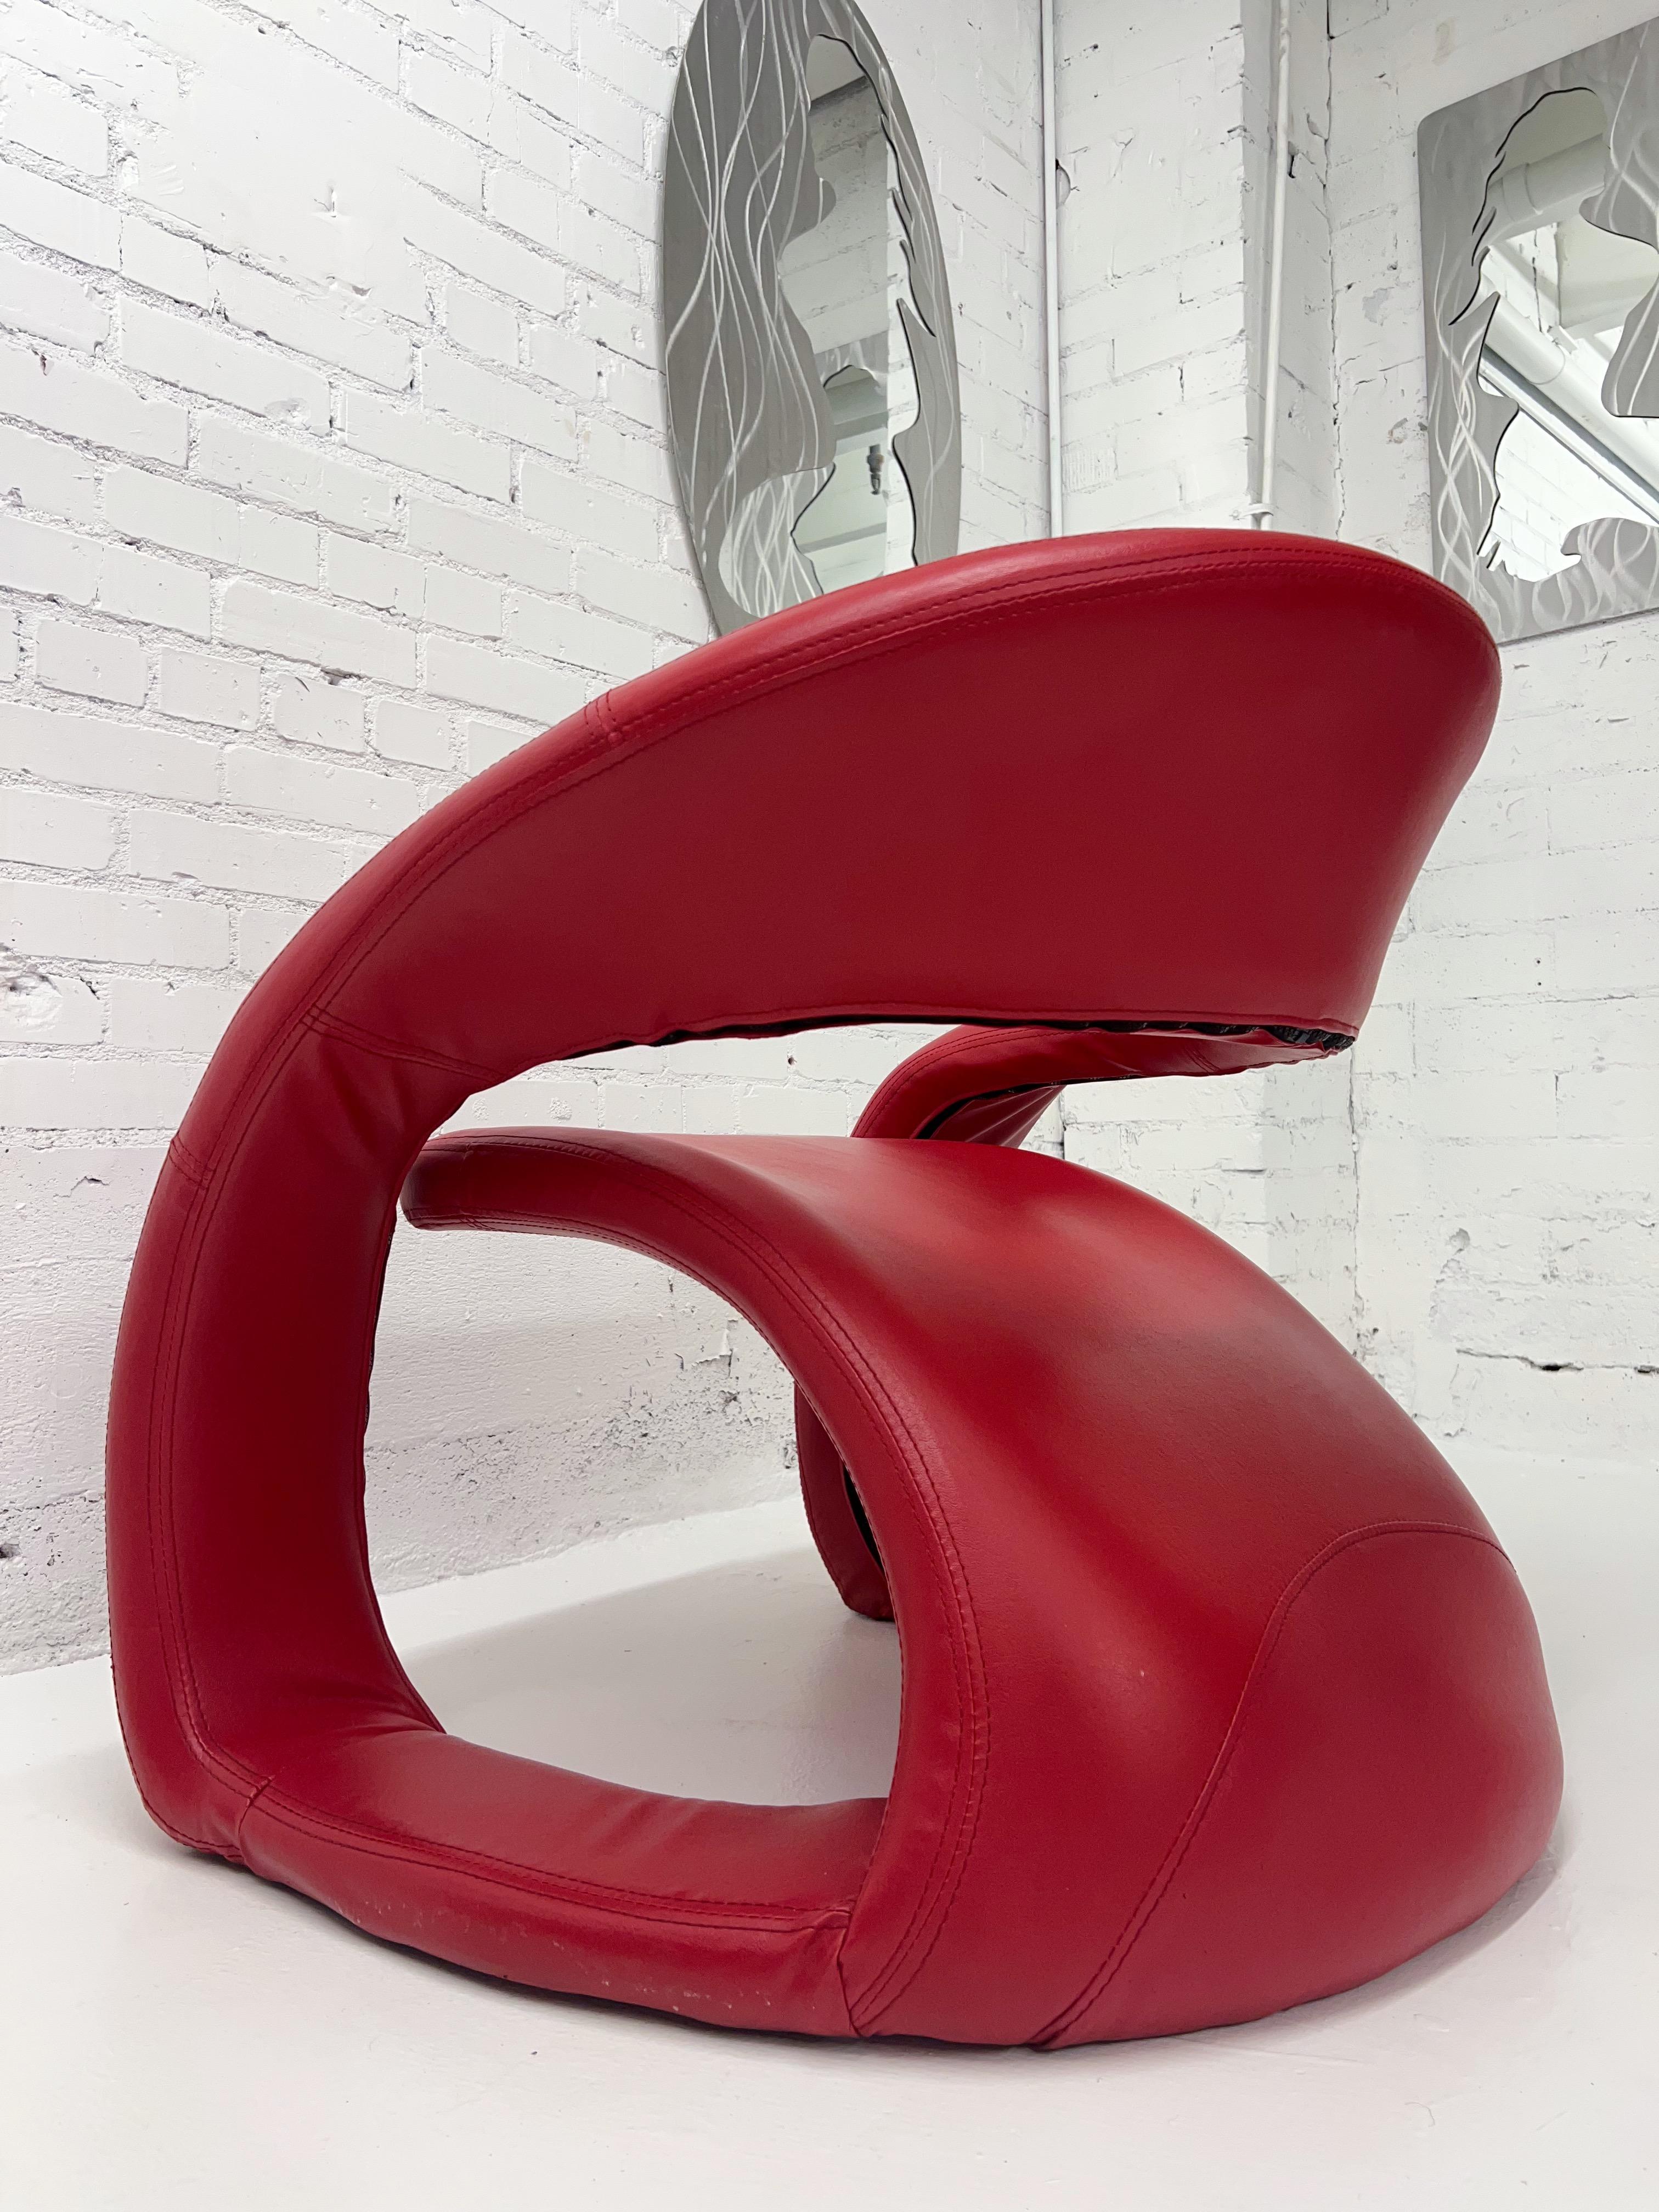 Post-Modern 1980's Red Pop Art Tongue Chair Attributed to Jaymar